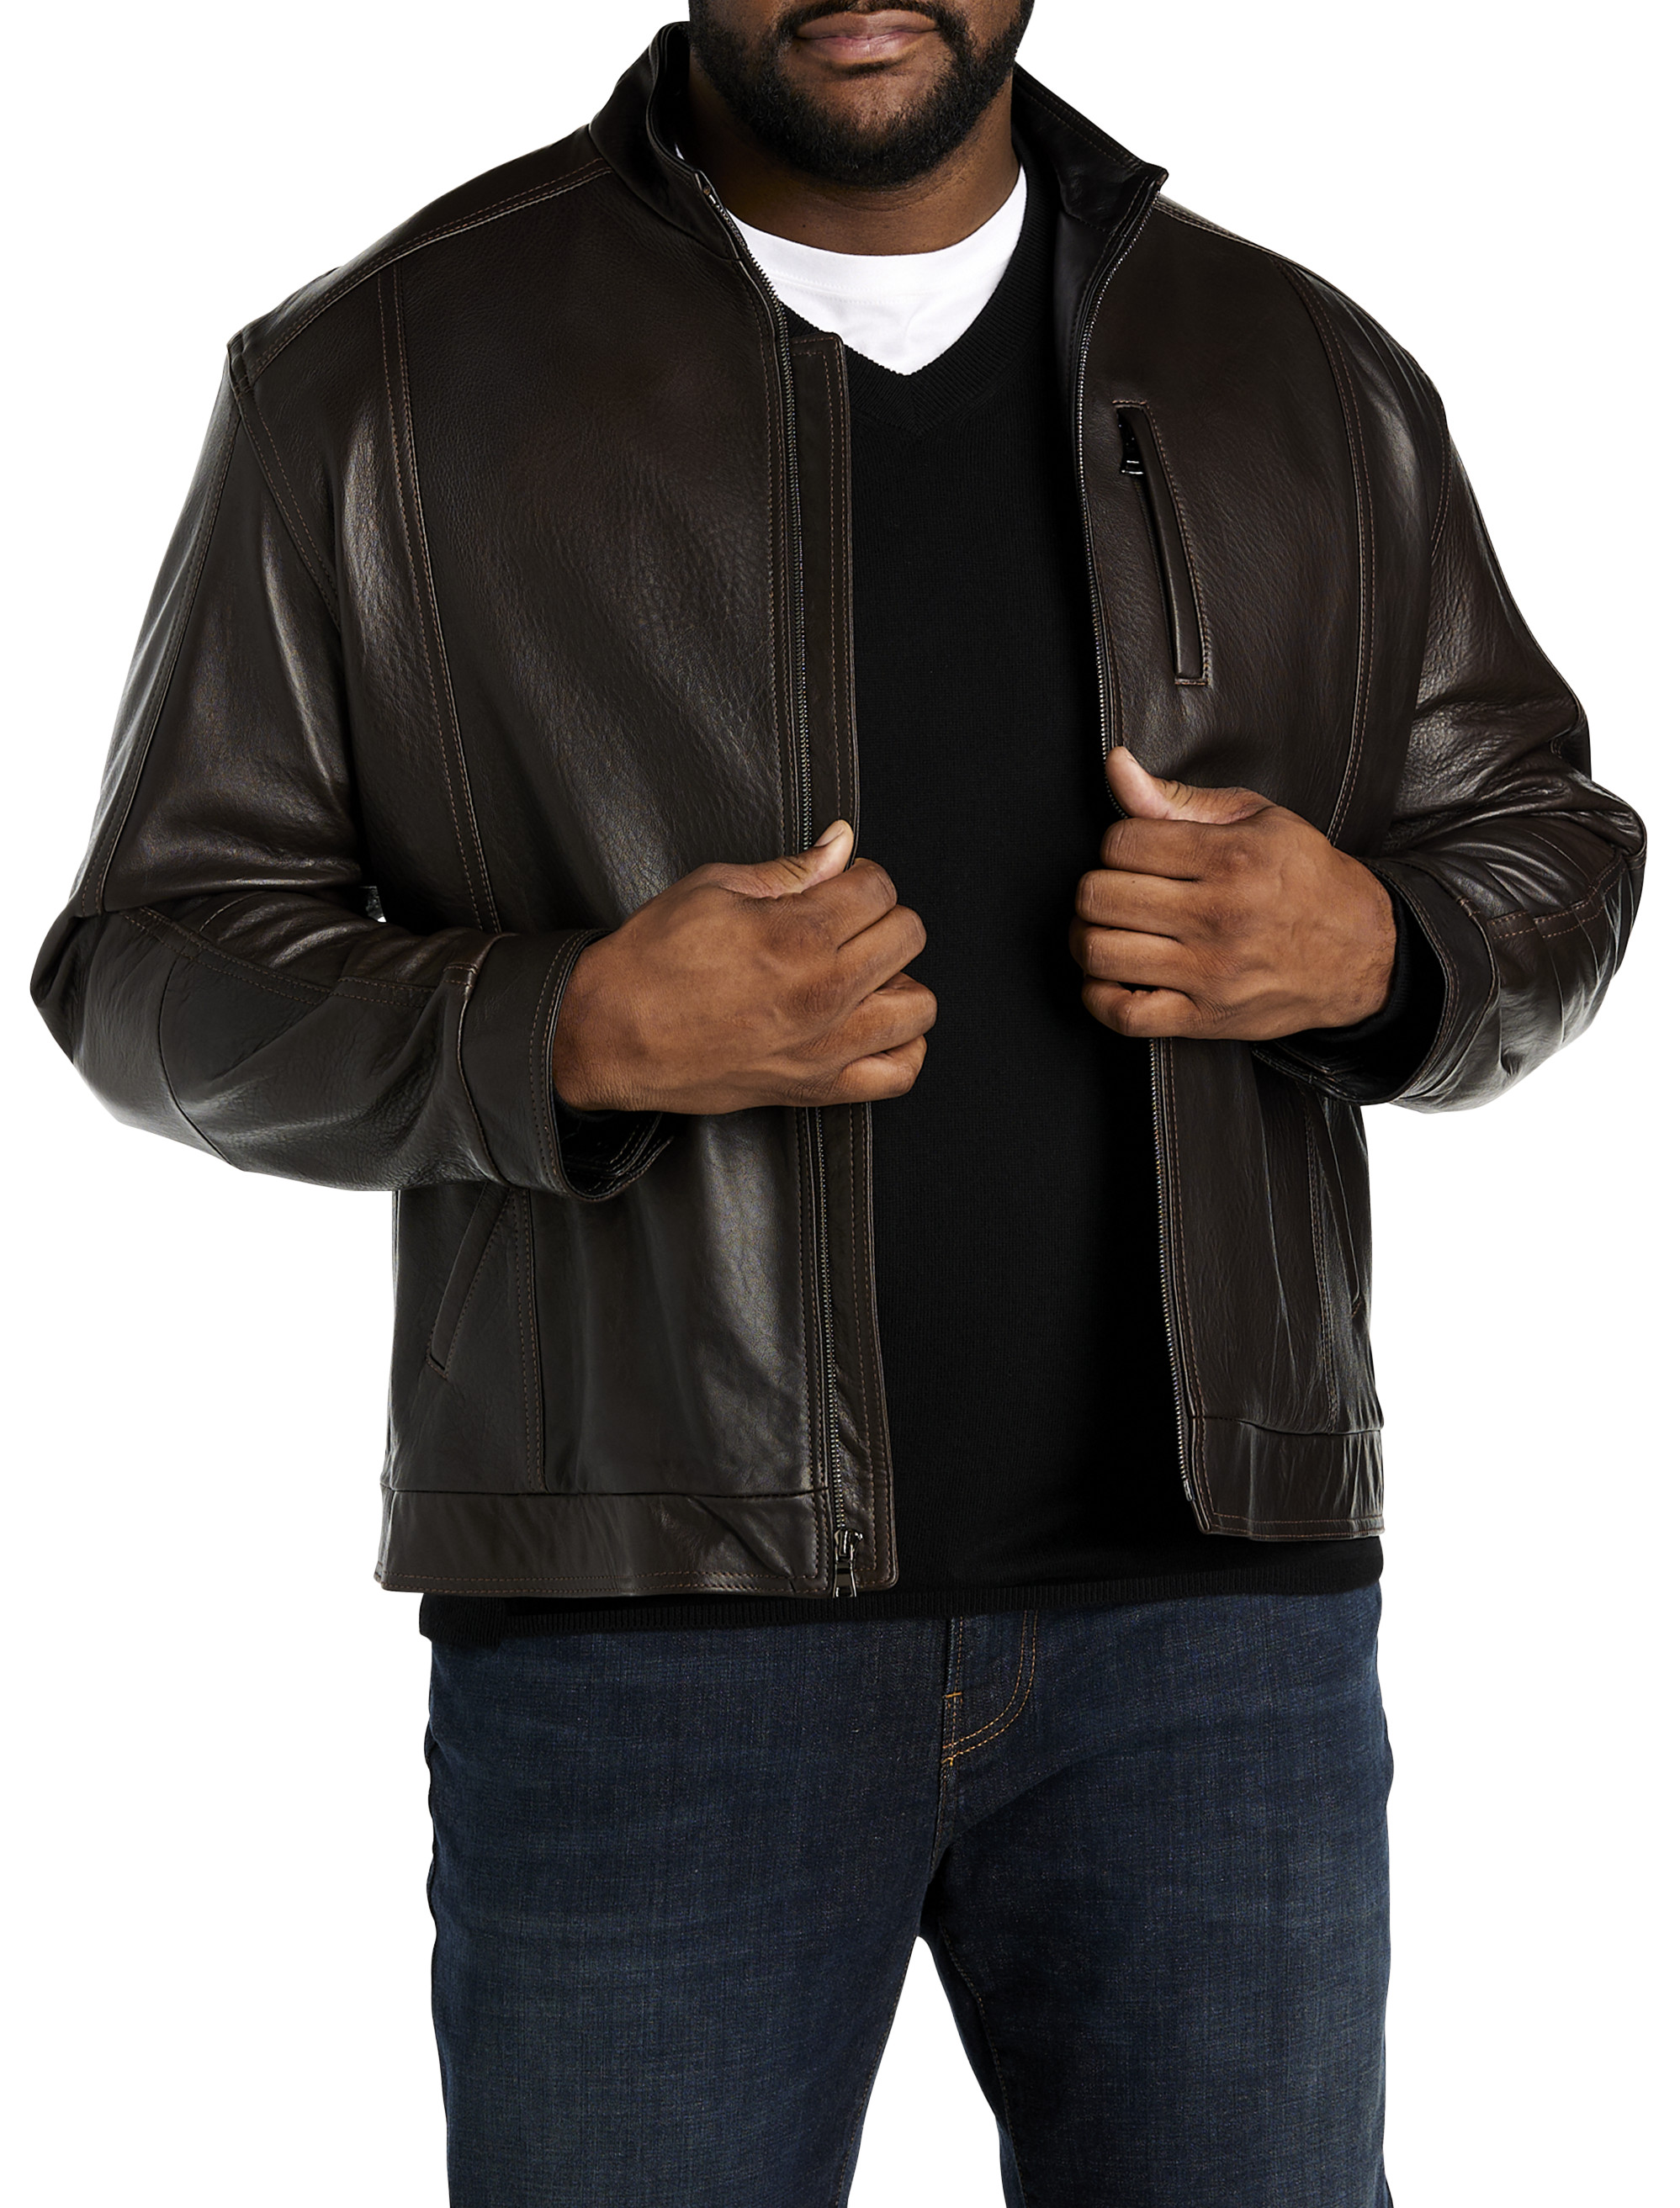 Mens Leather Jacket With Hoodie - Tall size